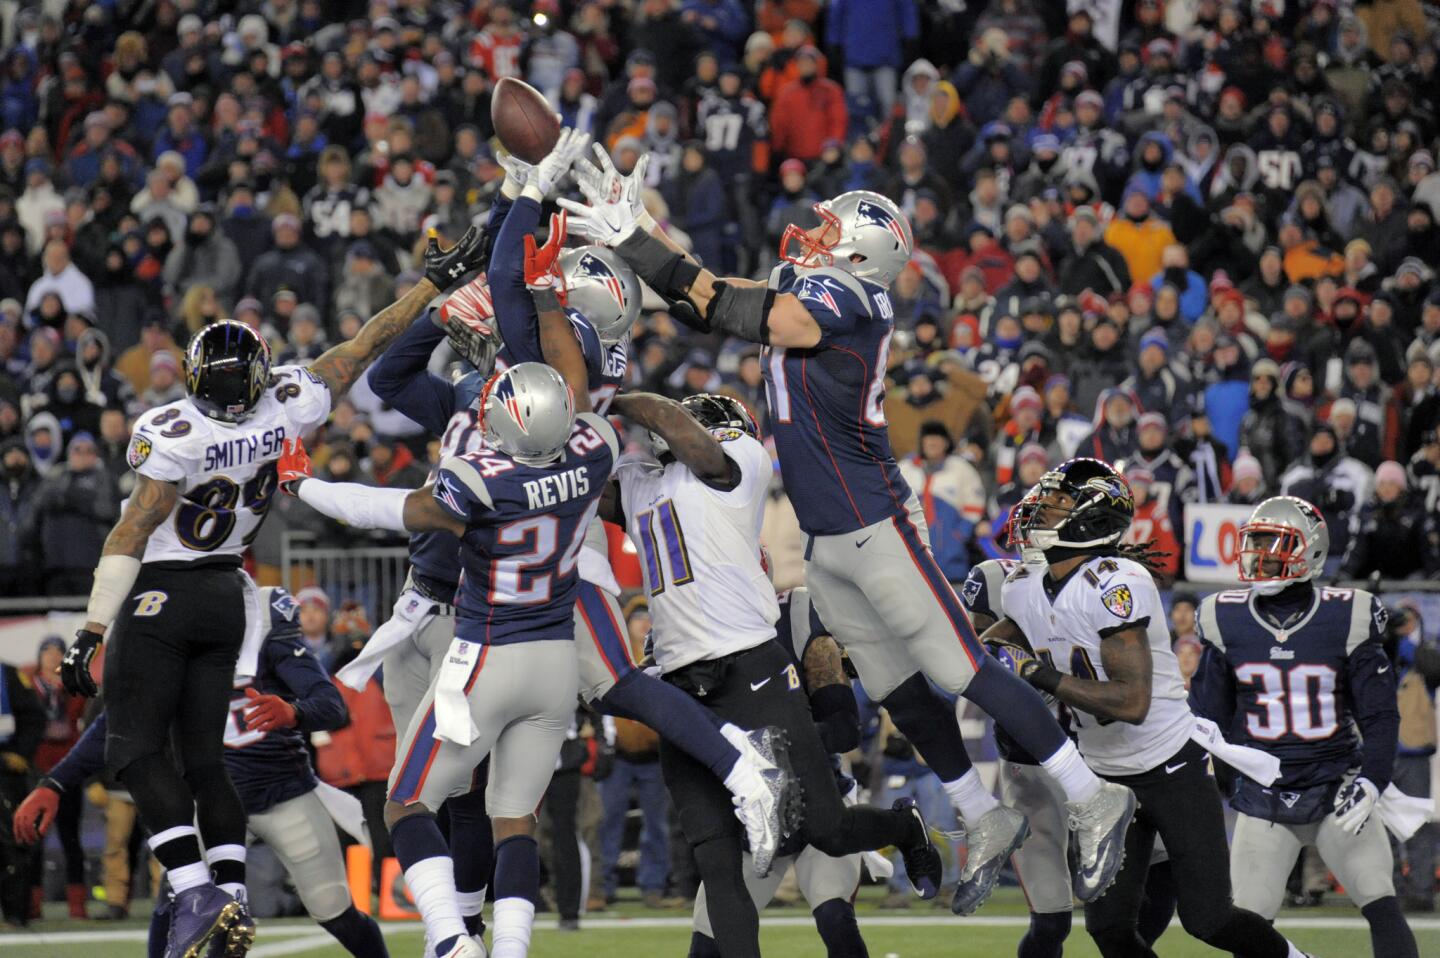 Ravens wide receiver Steve Smith stretches backward in vain as the New England Patriots knock the ball clear on a last-ditch pass from Ravens quarterback Joe Flacco.